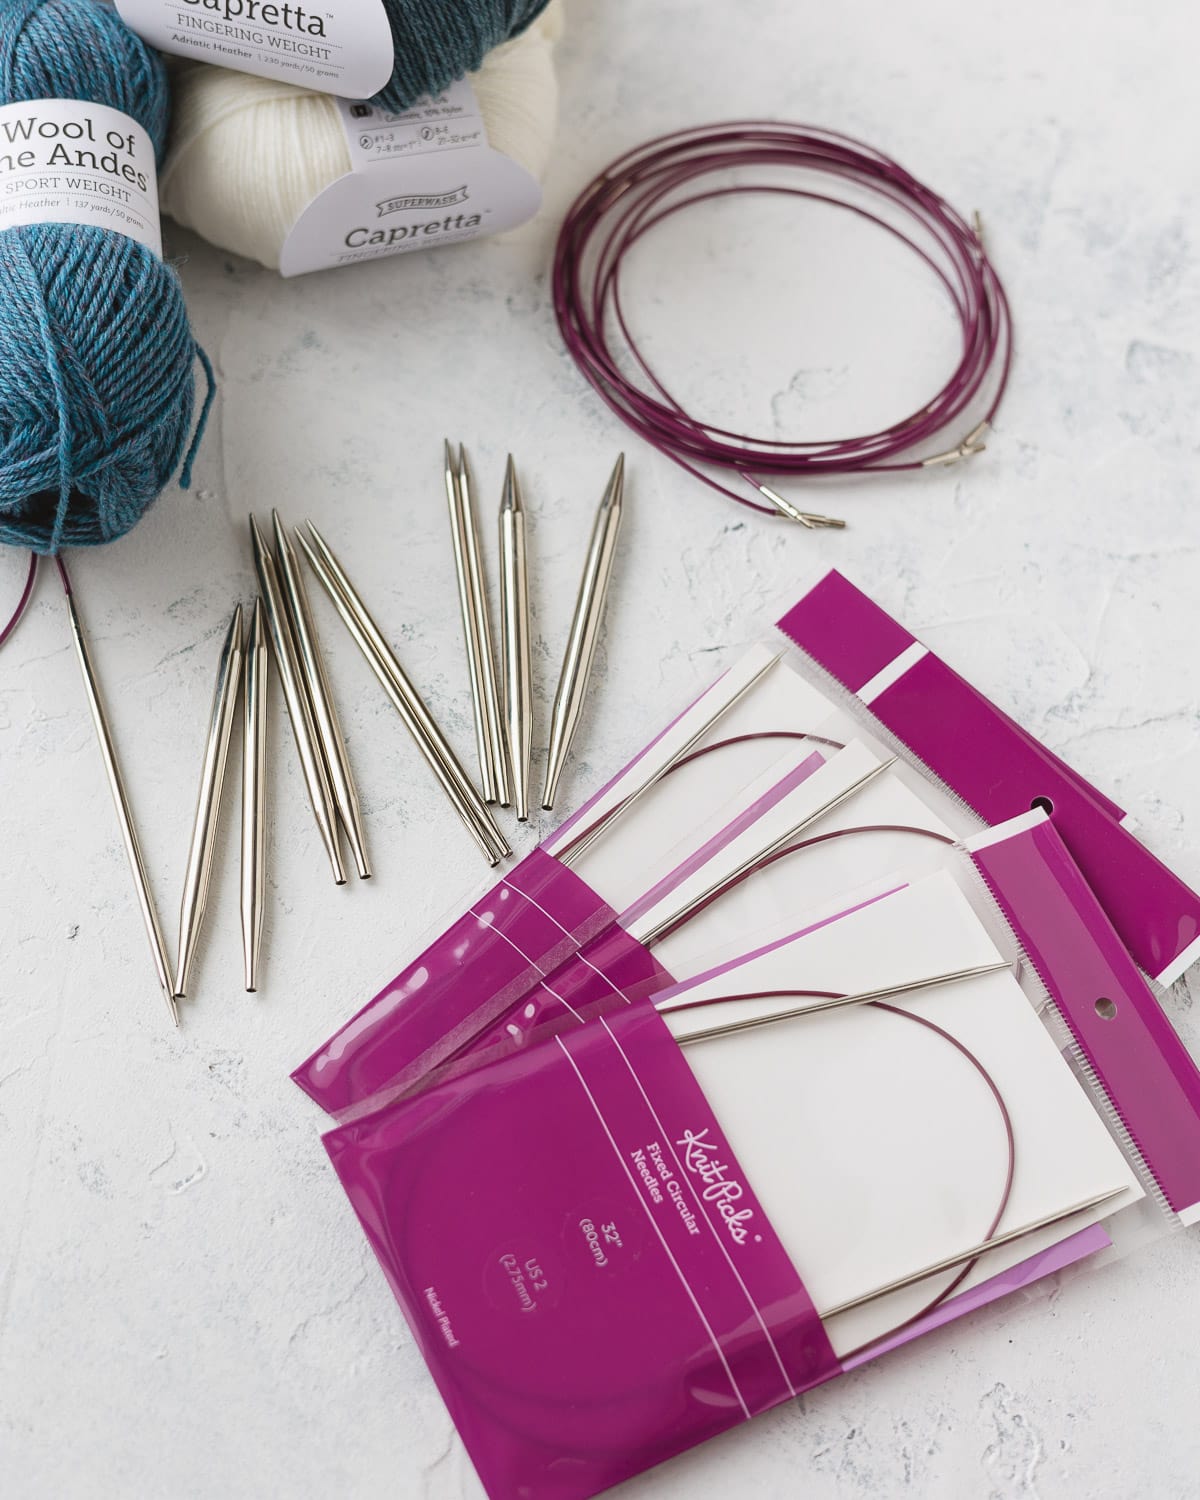 Nickel plated interchangeable knitting needle set, packages of fixed circular needles, cables, and yarn.